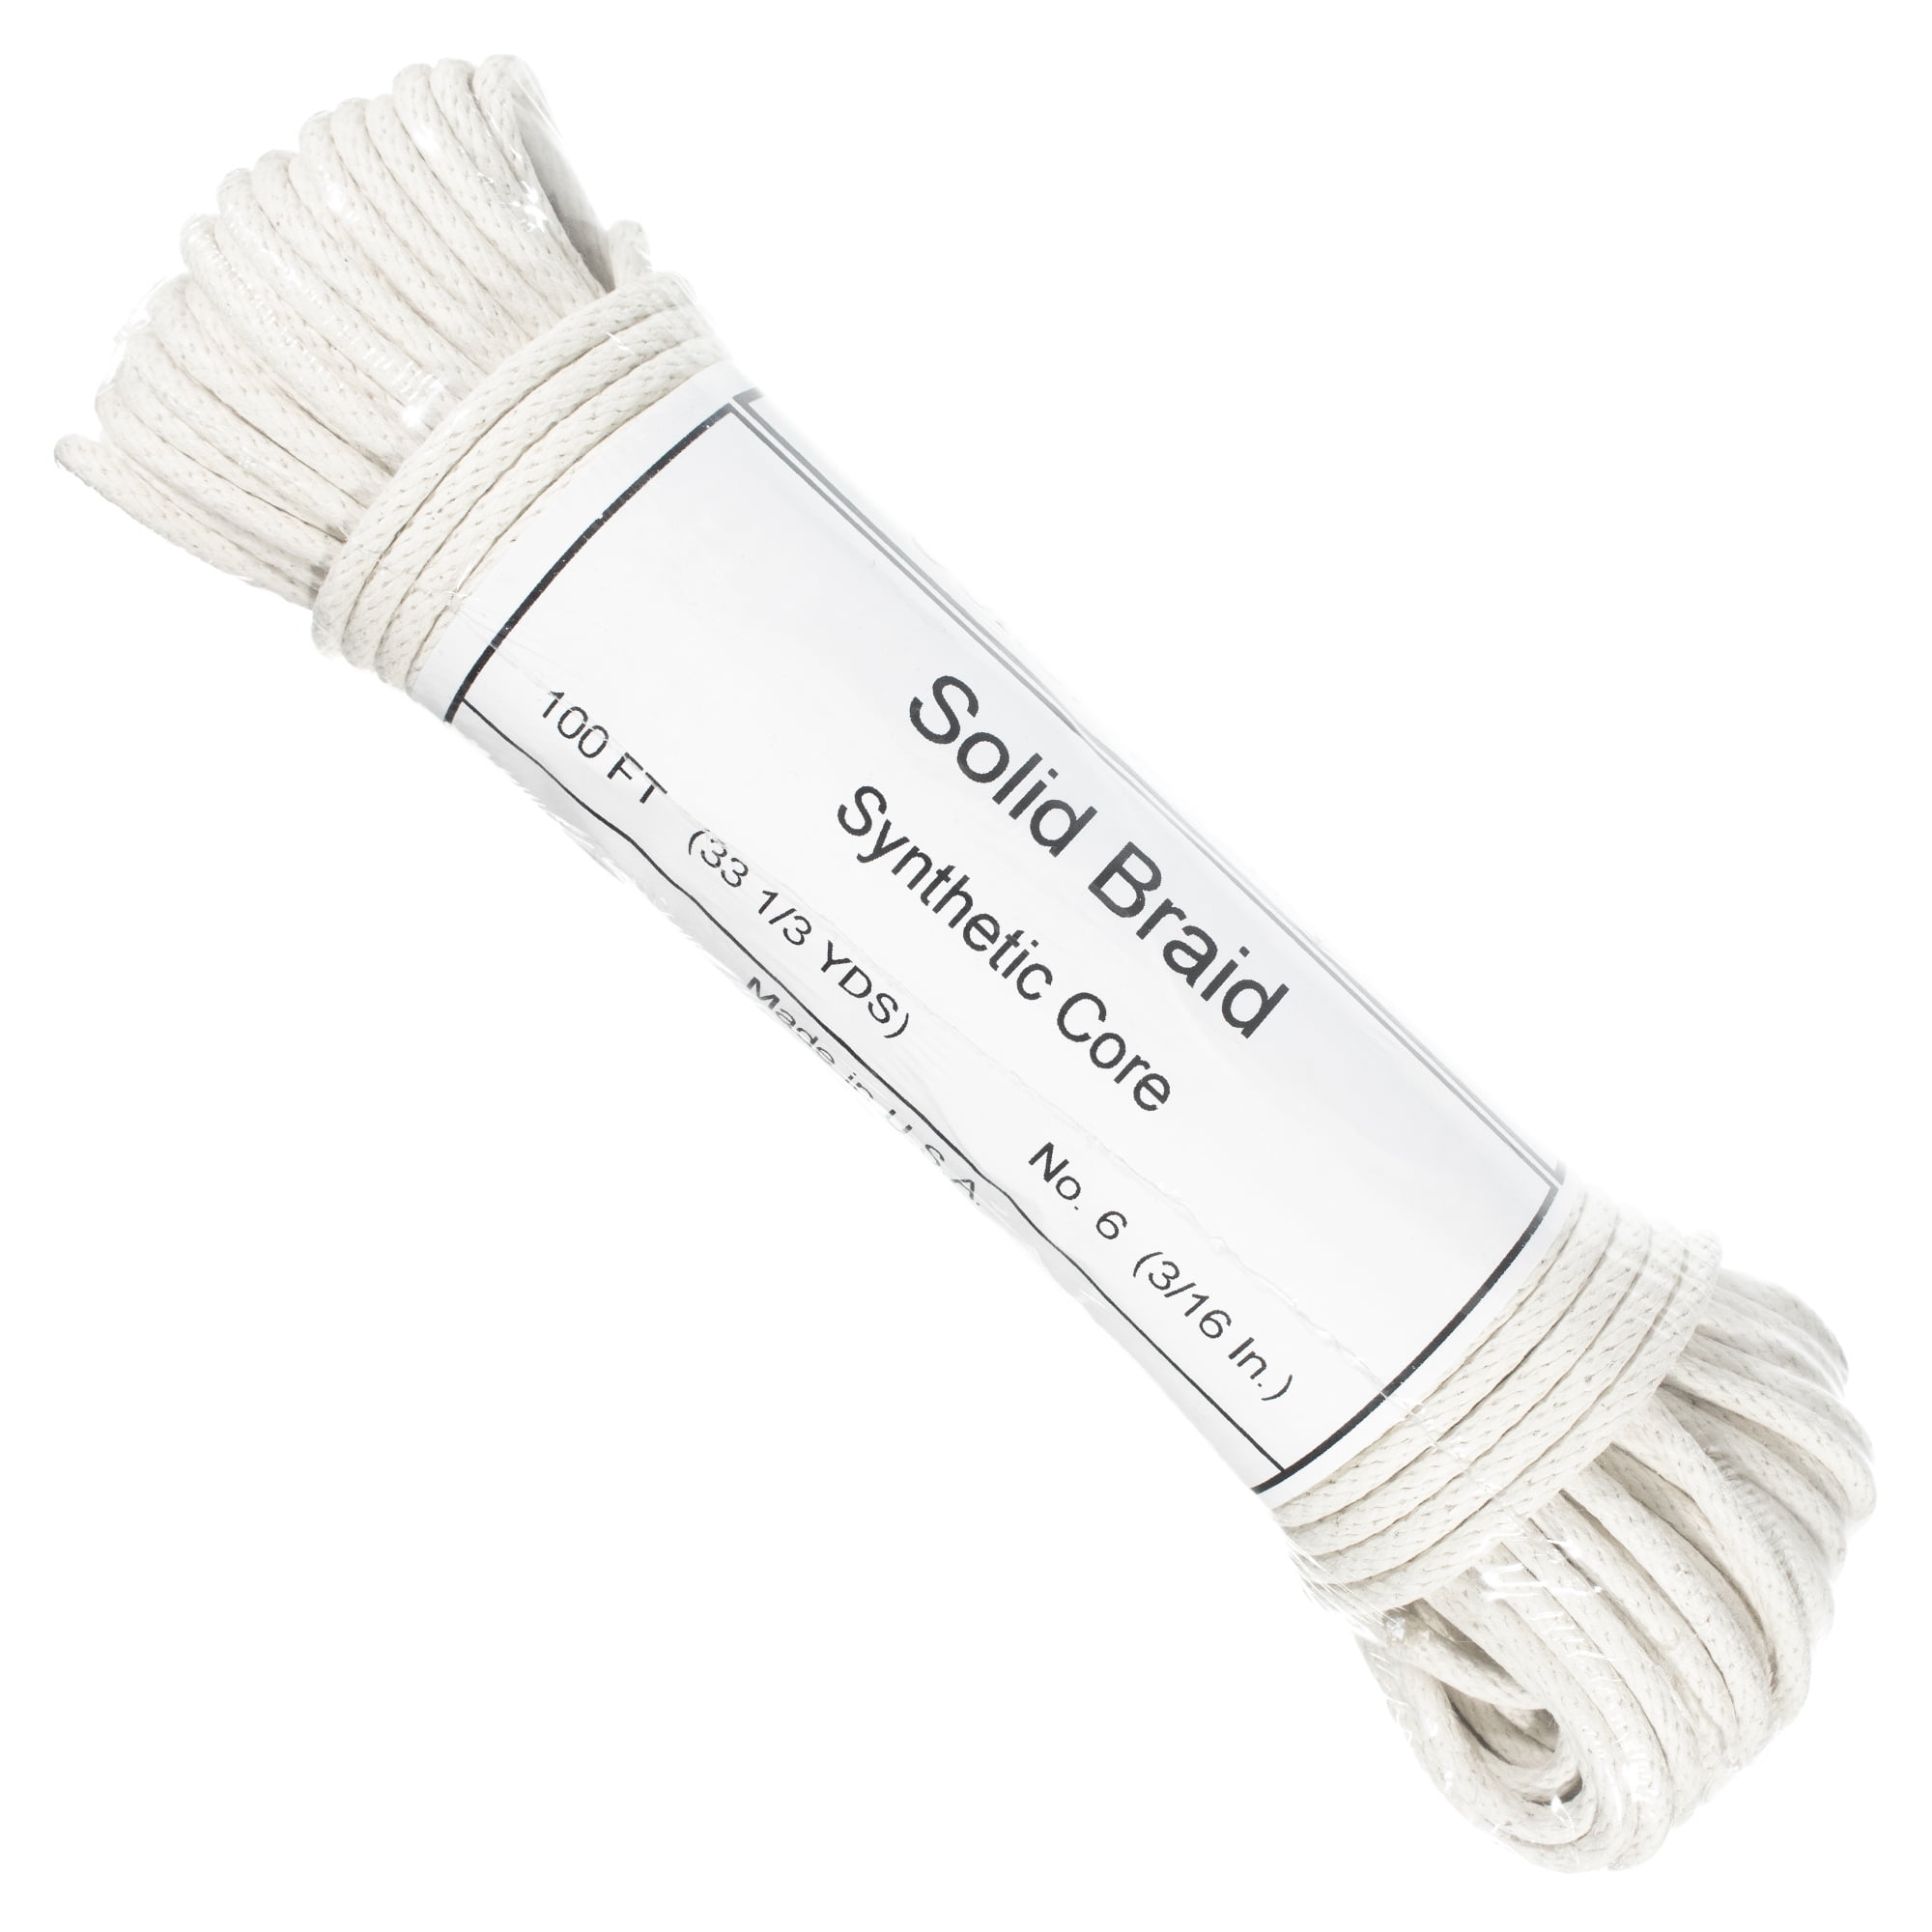 ATERET Cotton Sash Cord 1/4 x 100′ Hank, All Purpose Rope for